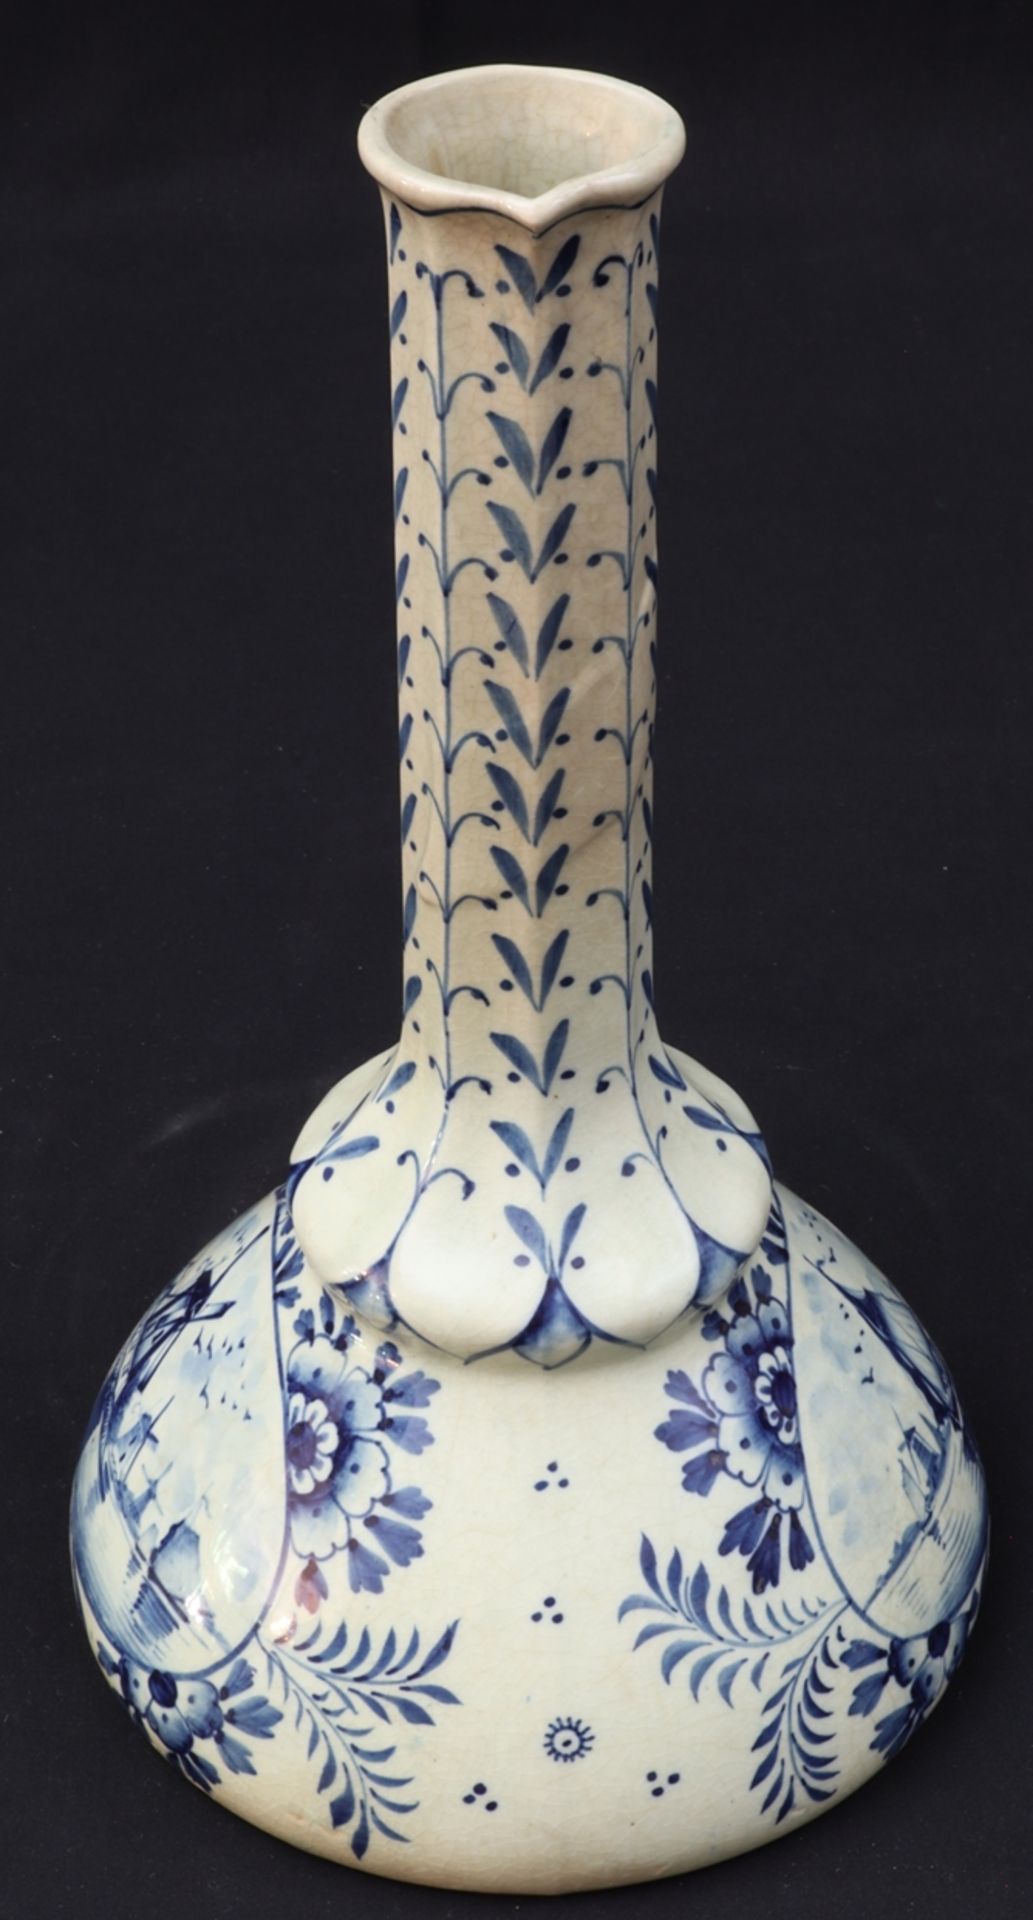 Delft narrow-necked jug, mid to late 19th c., Holland - Image 2 of 3